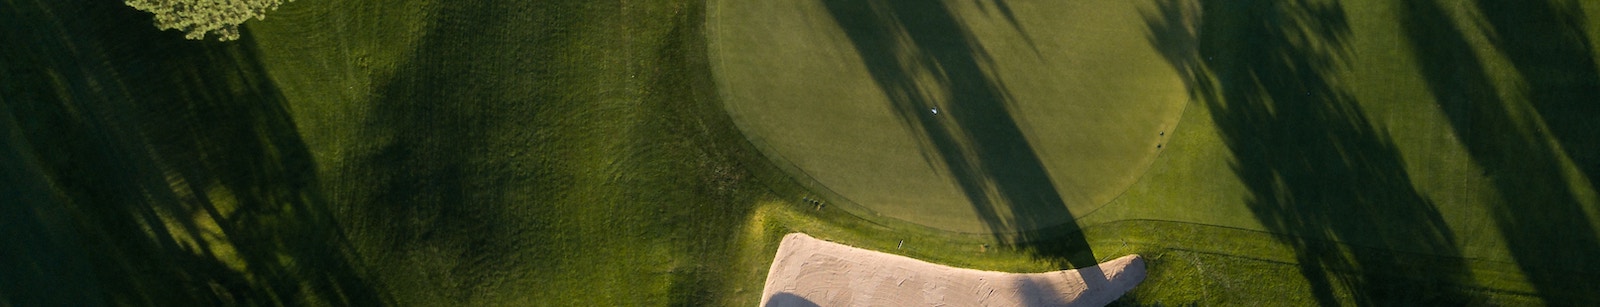 Aerial photo of a golf green with flag pin.